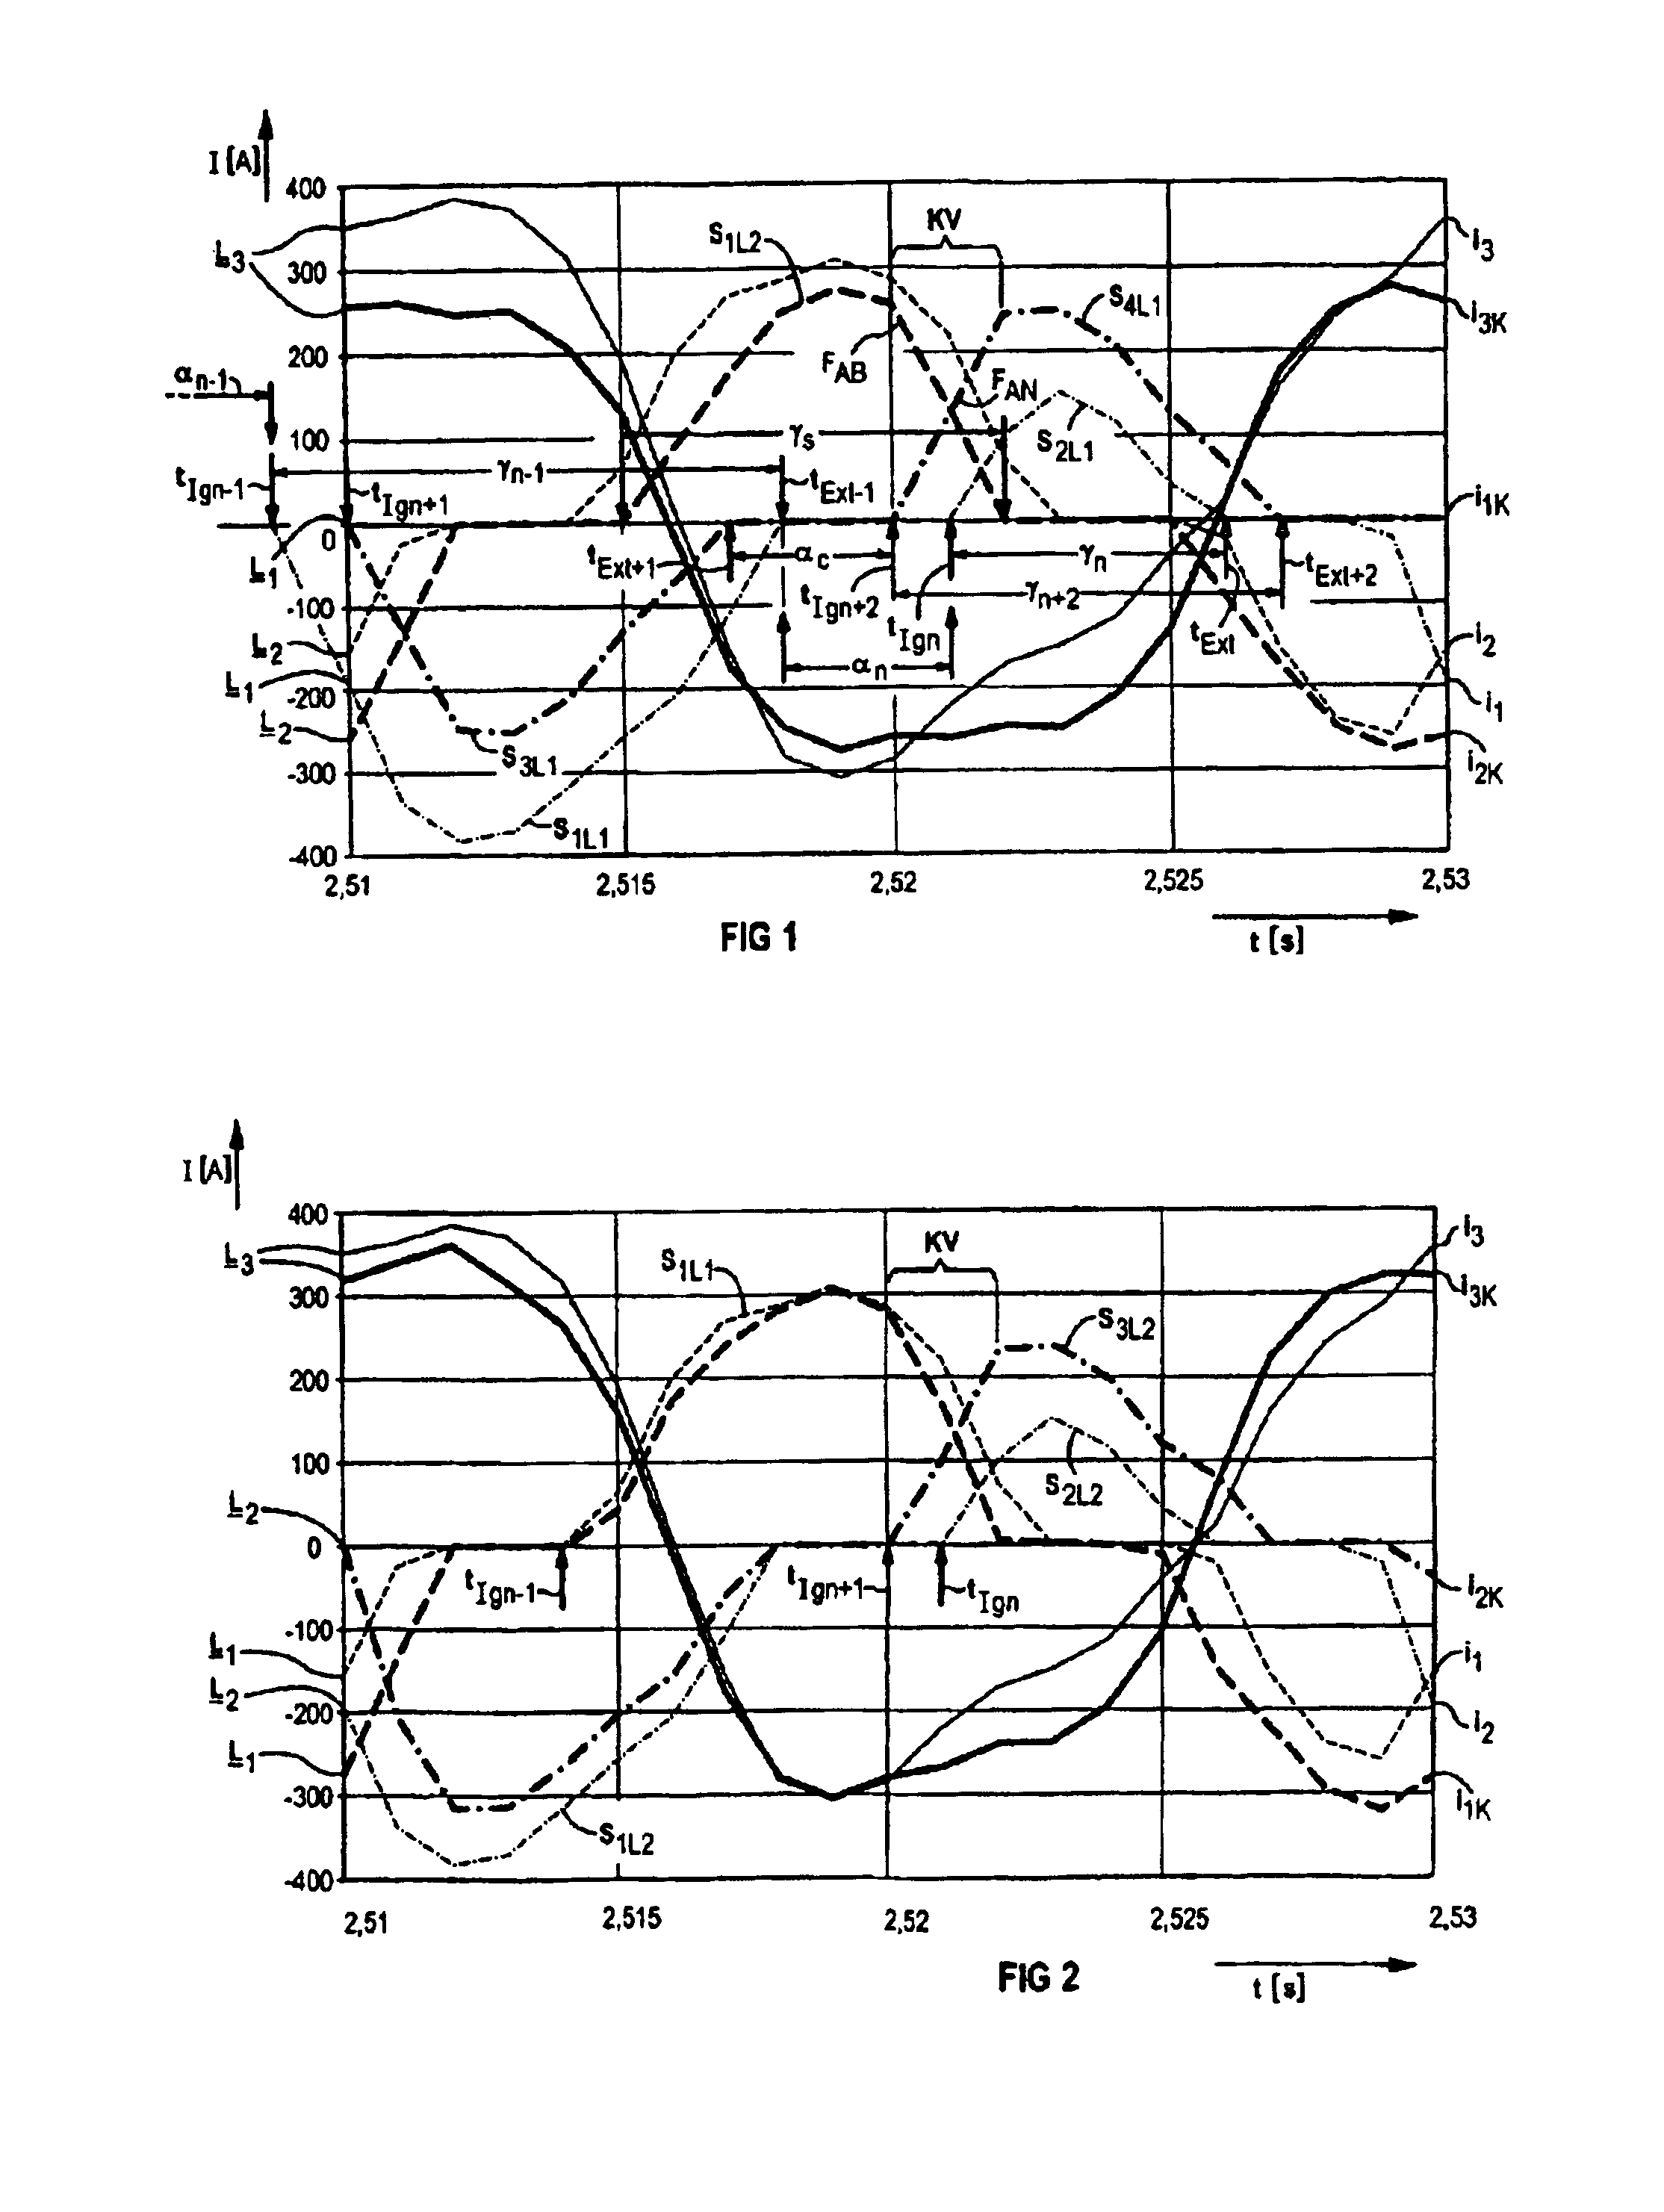 Method for reducing the influence of a DC current component in the load current of an asynchronous motor